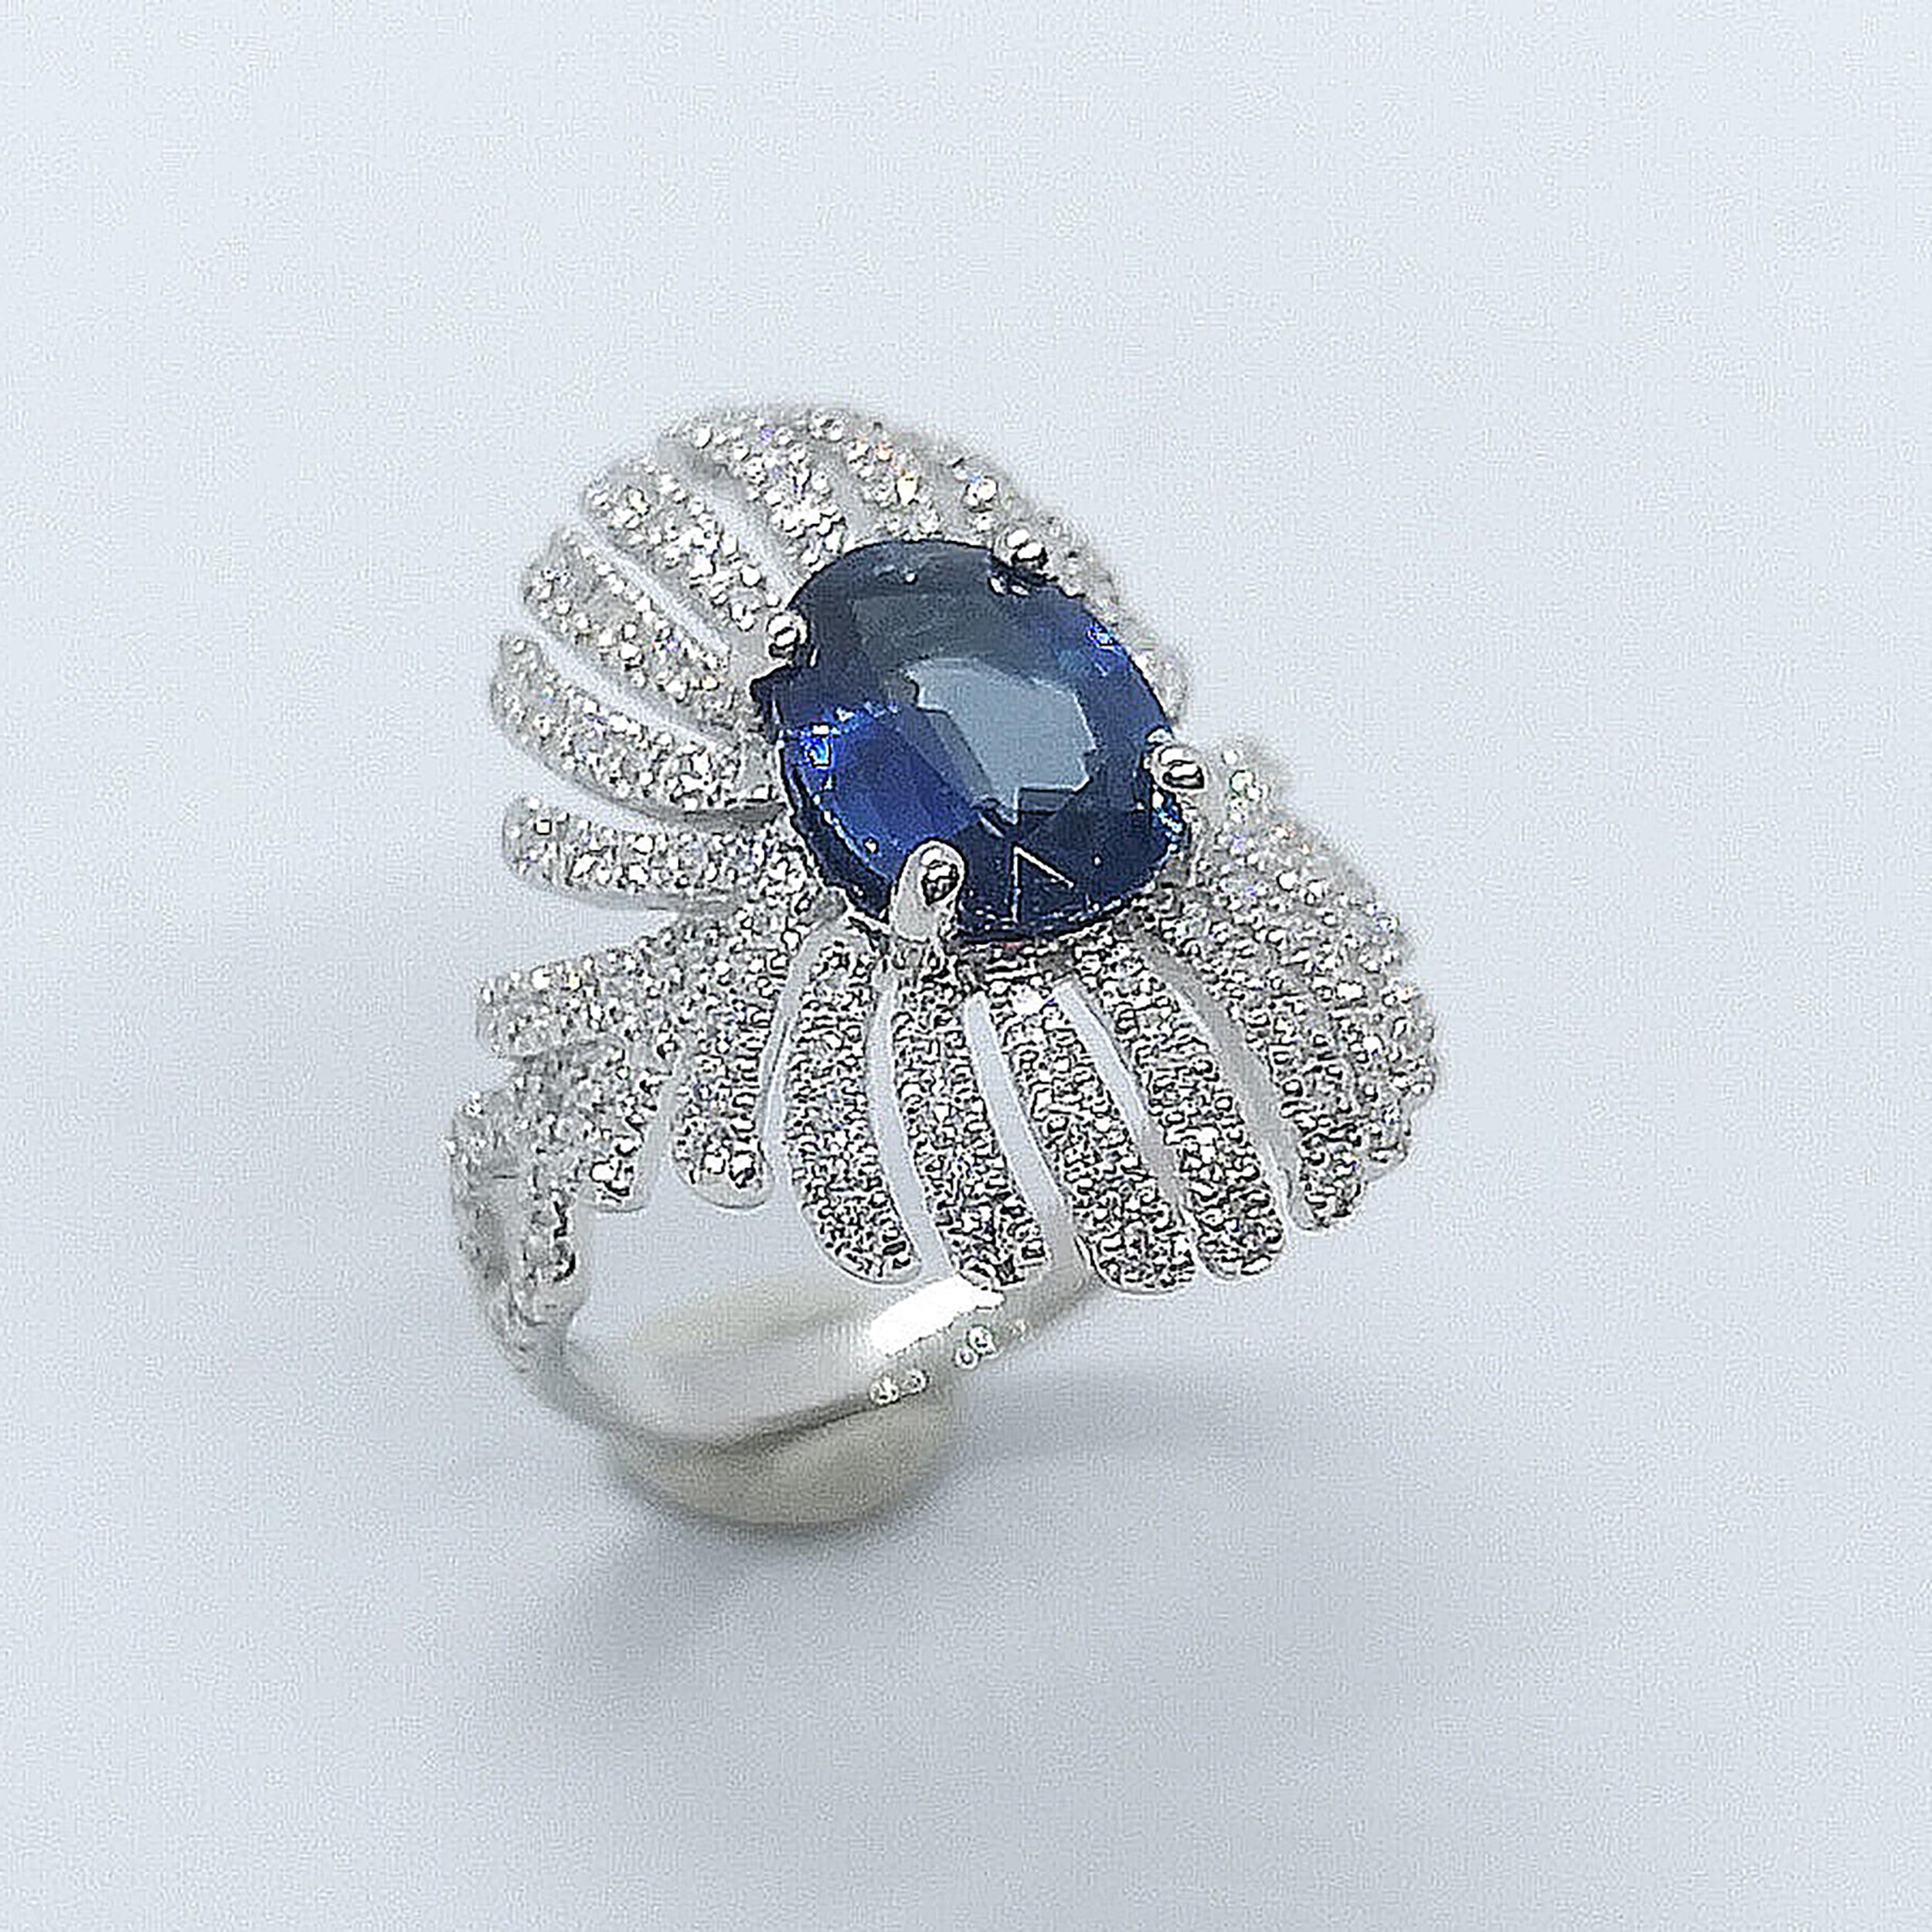 Blue Sapphire 2.26 carats with Diamond 0.55 carat Ring set in 18 Karat White Gold Settings

Width:  1.5 cm 
Length: 2.3 cm
Ring Size: 55
Total Weight: 5.80 grams

